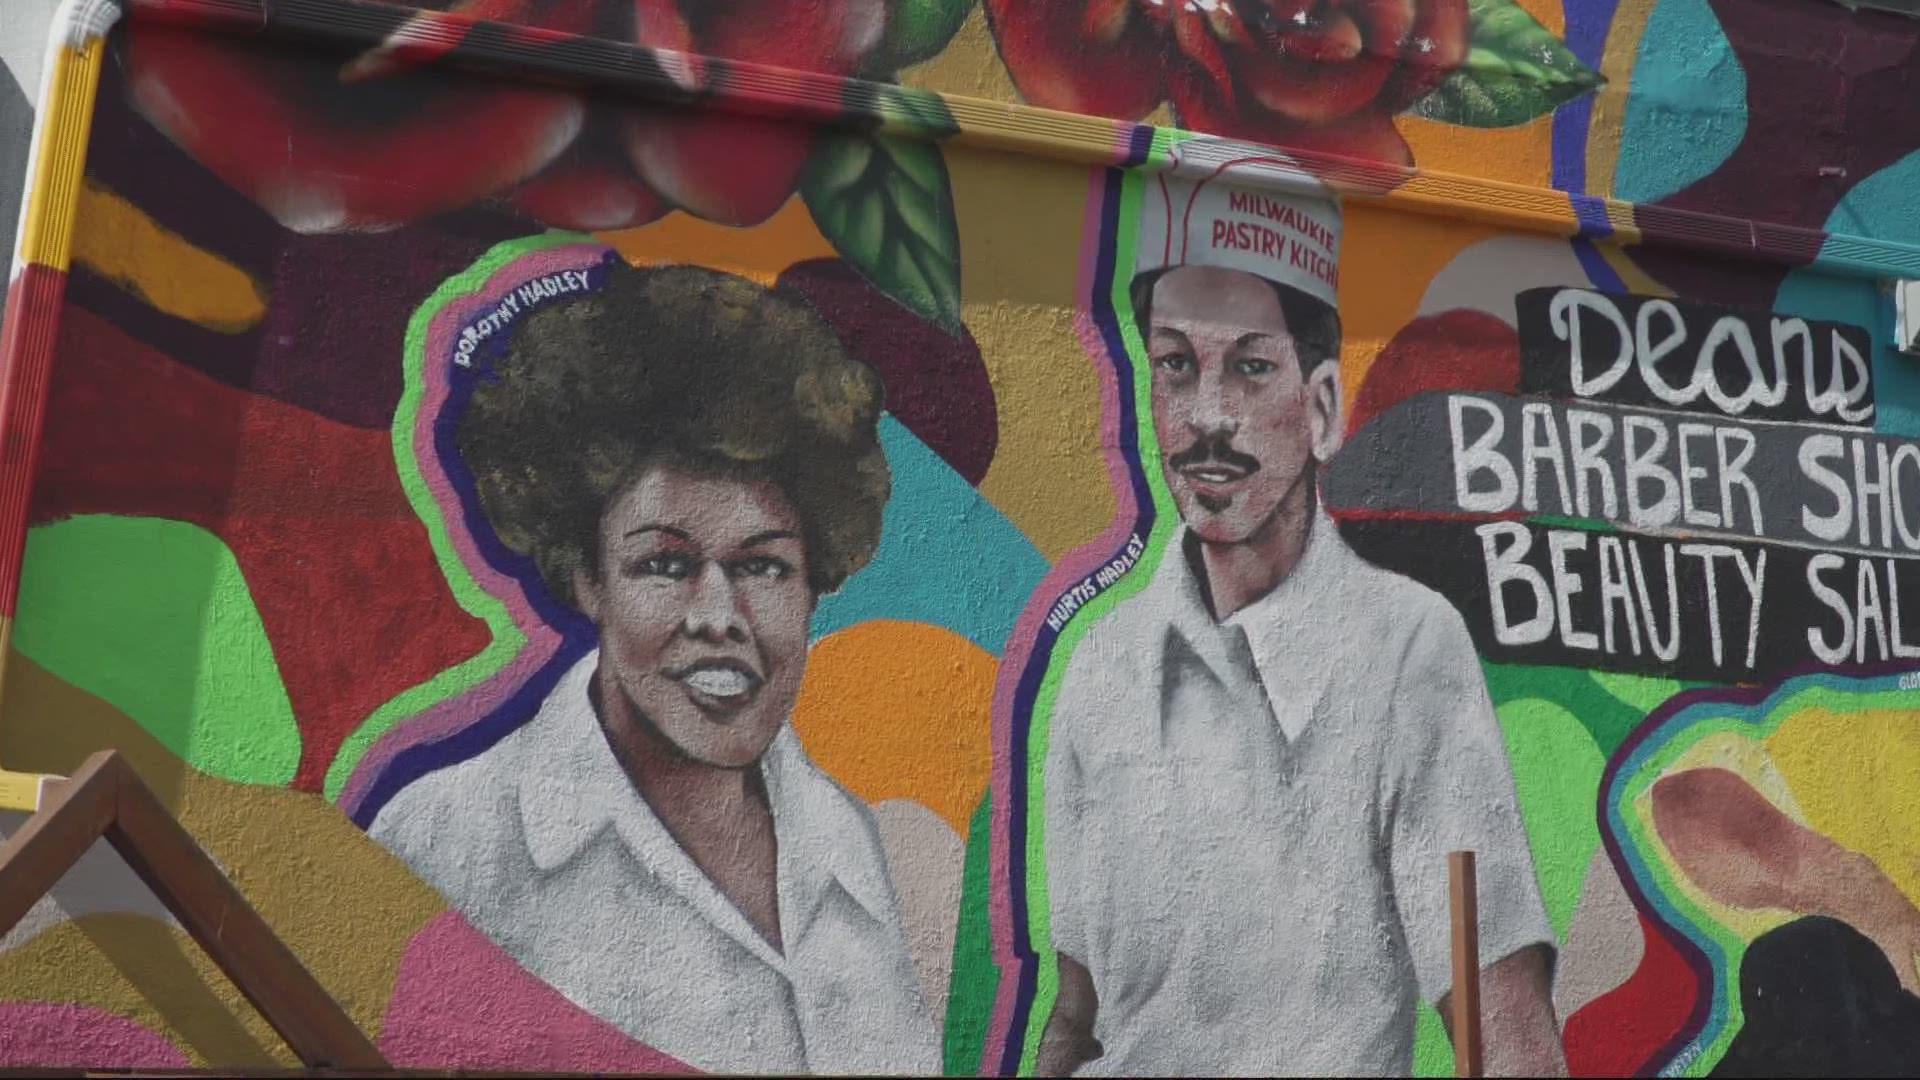 Community members held a celebration for the mural, which pays tribute to past, present and future Black-owned businesses in Portland.